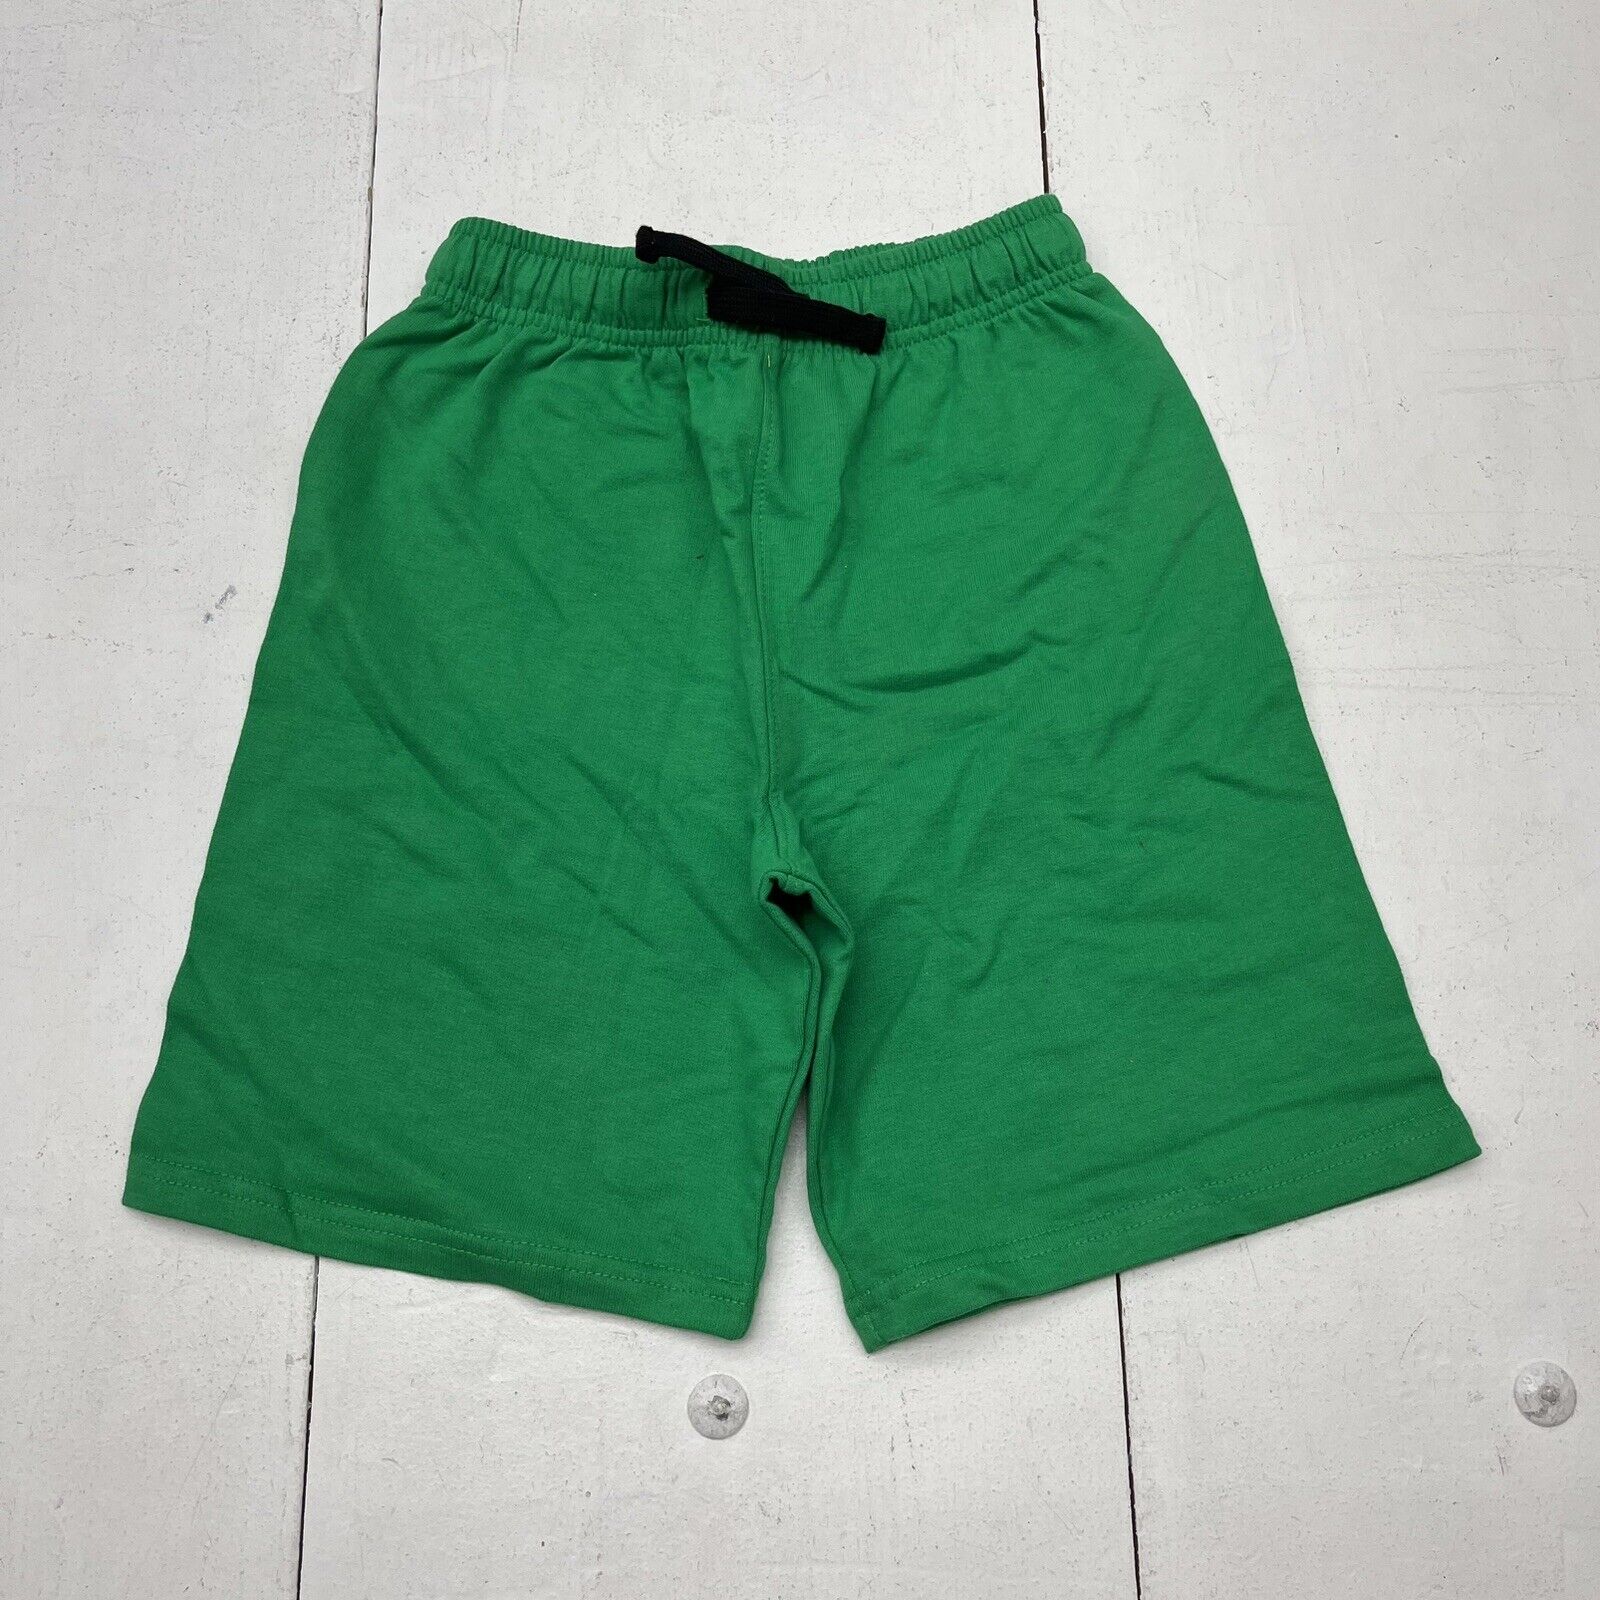 Green Athletic Sweat Shorts Boys Size 7 NEW